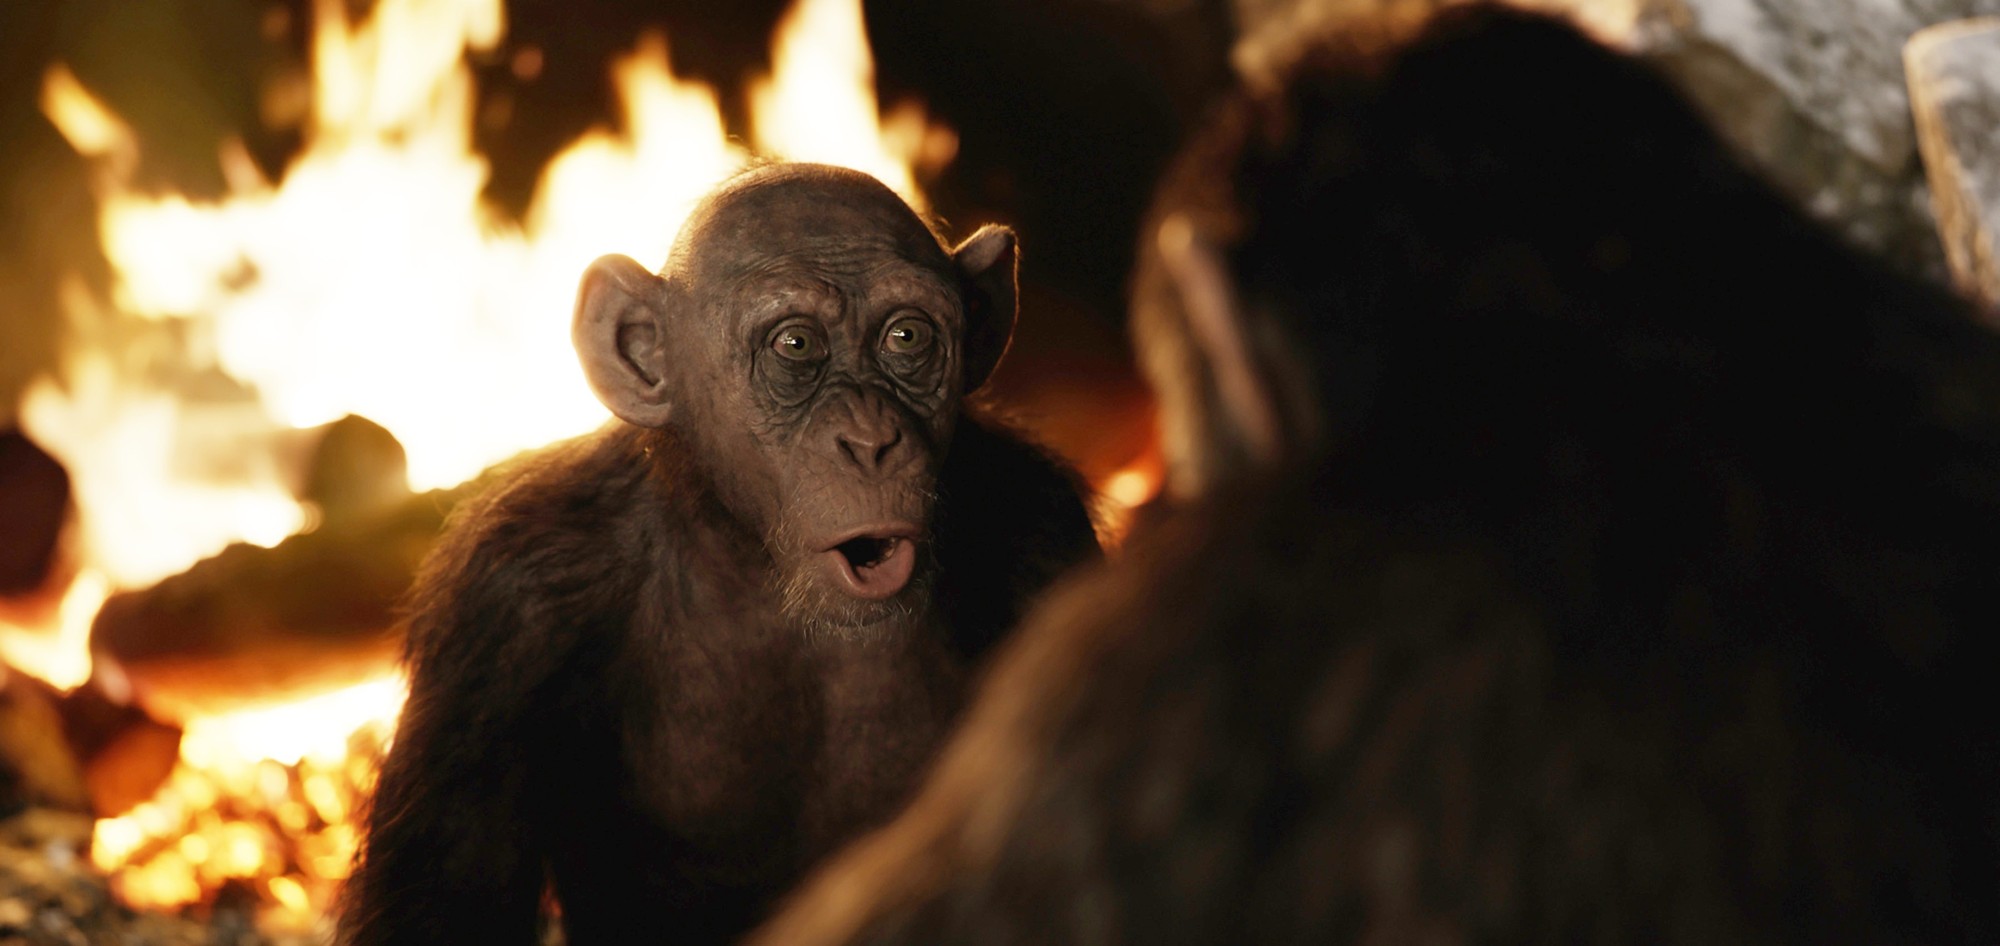 Bad Ape from 20th Century Fox's War for the Planet of the Apes (2017)